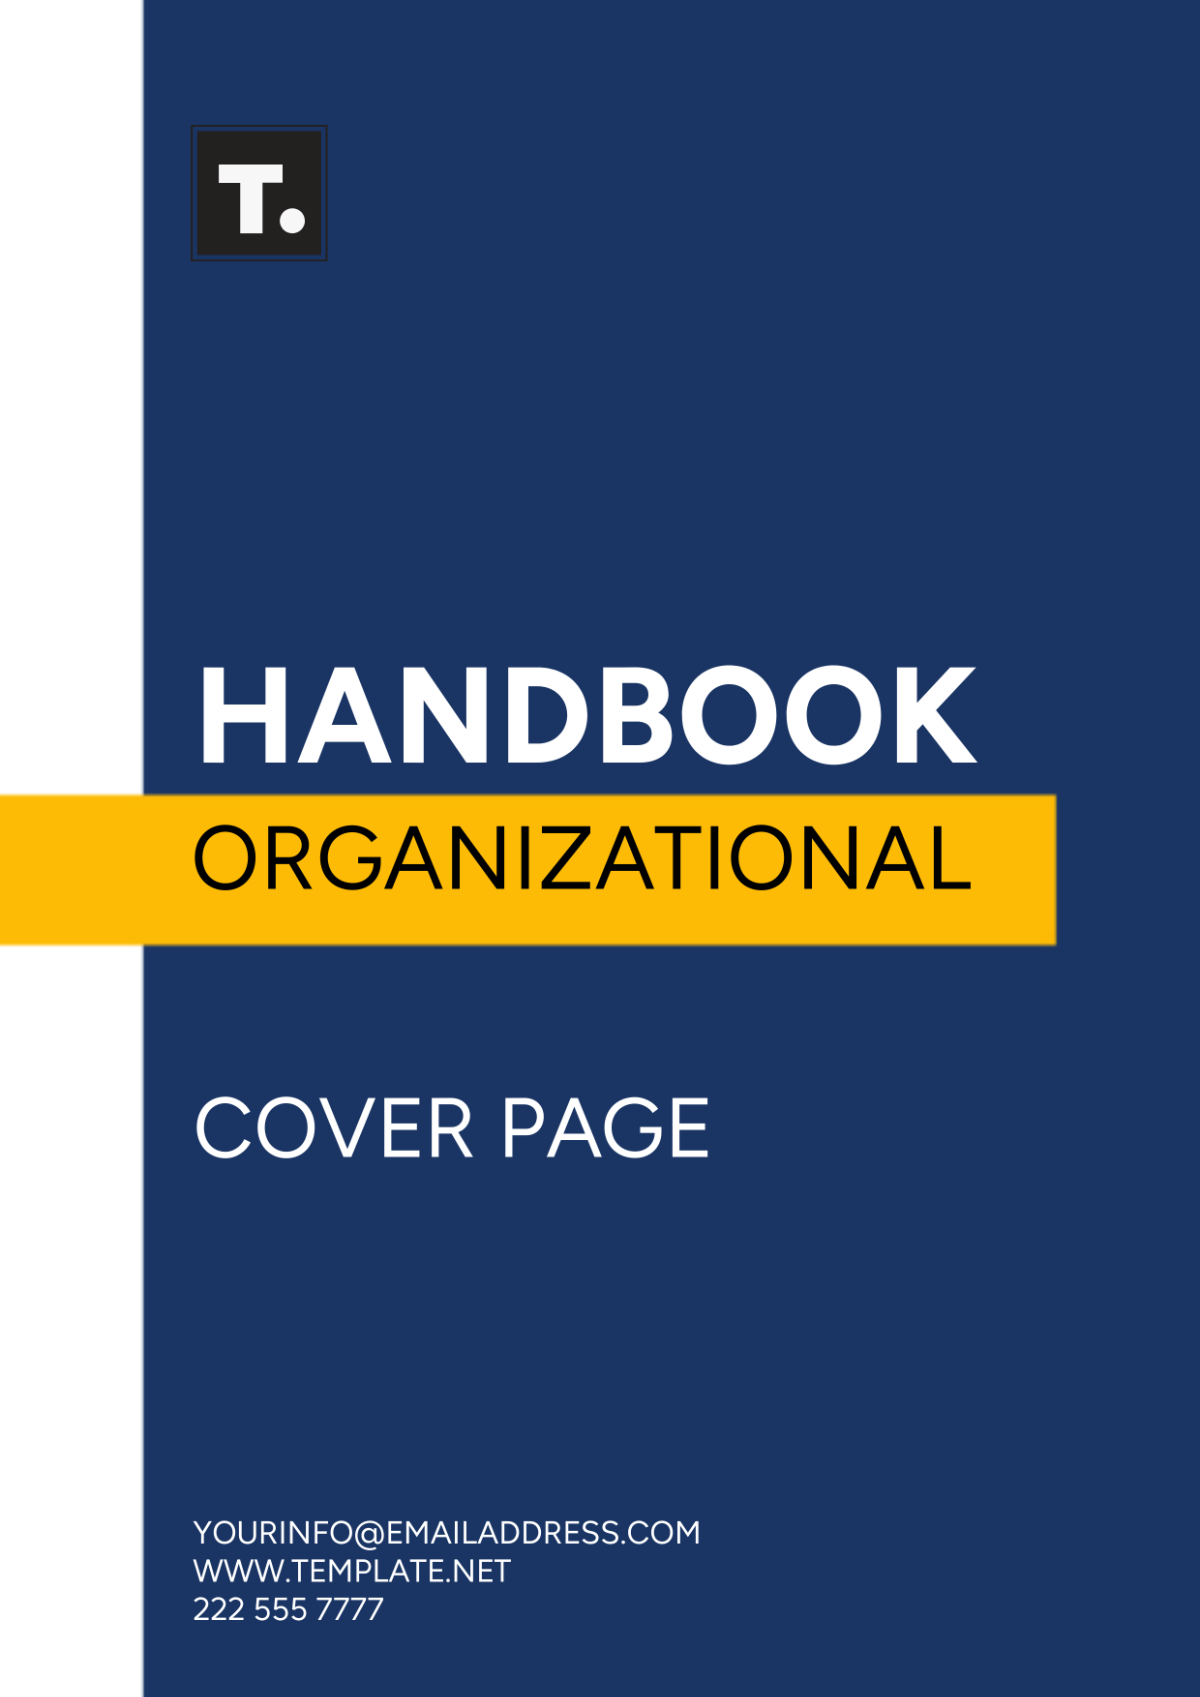 Free Handbook Organizational Cover Page Template